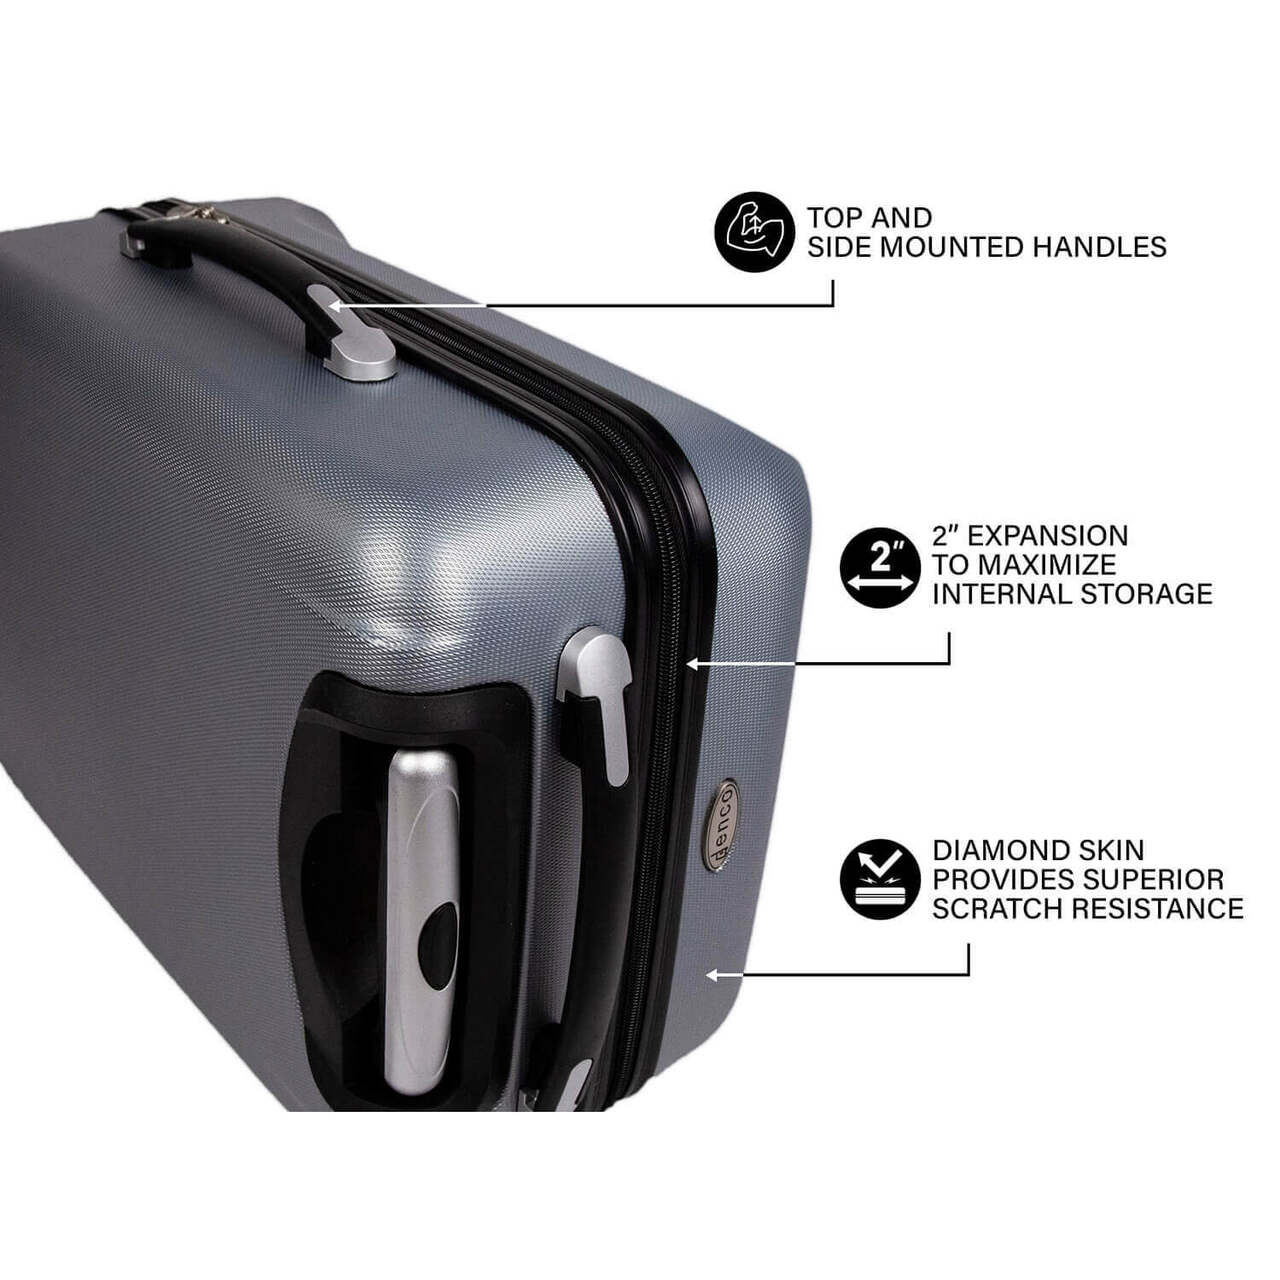 Cincinnati Bengals 20" Silver Domestic Carry-on Spinner